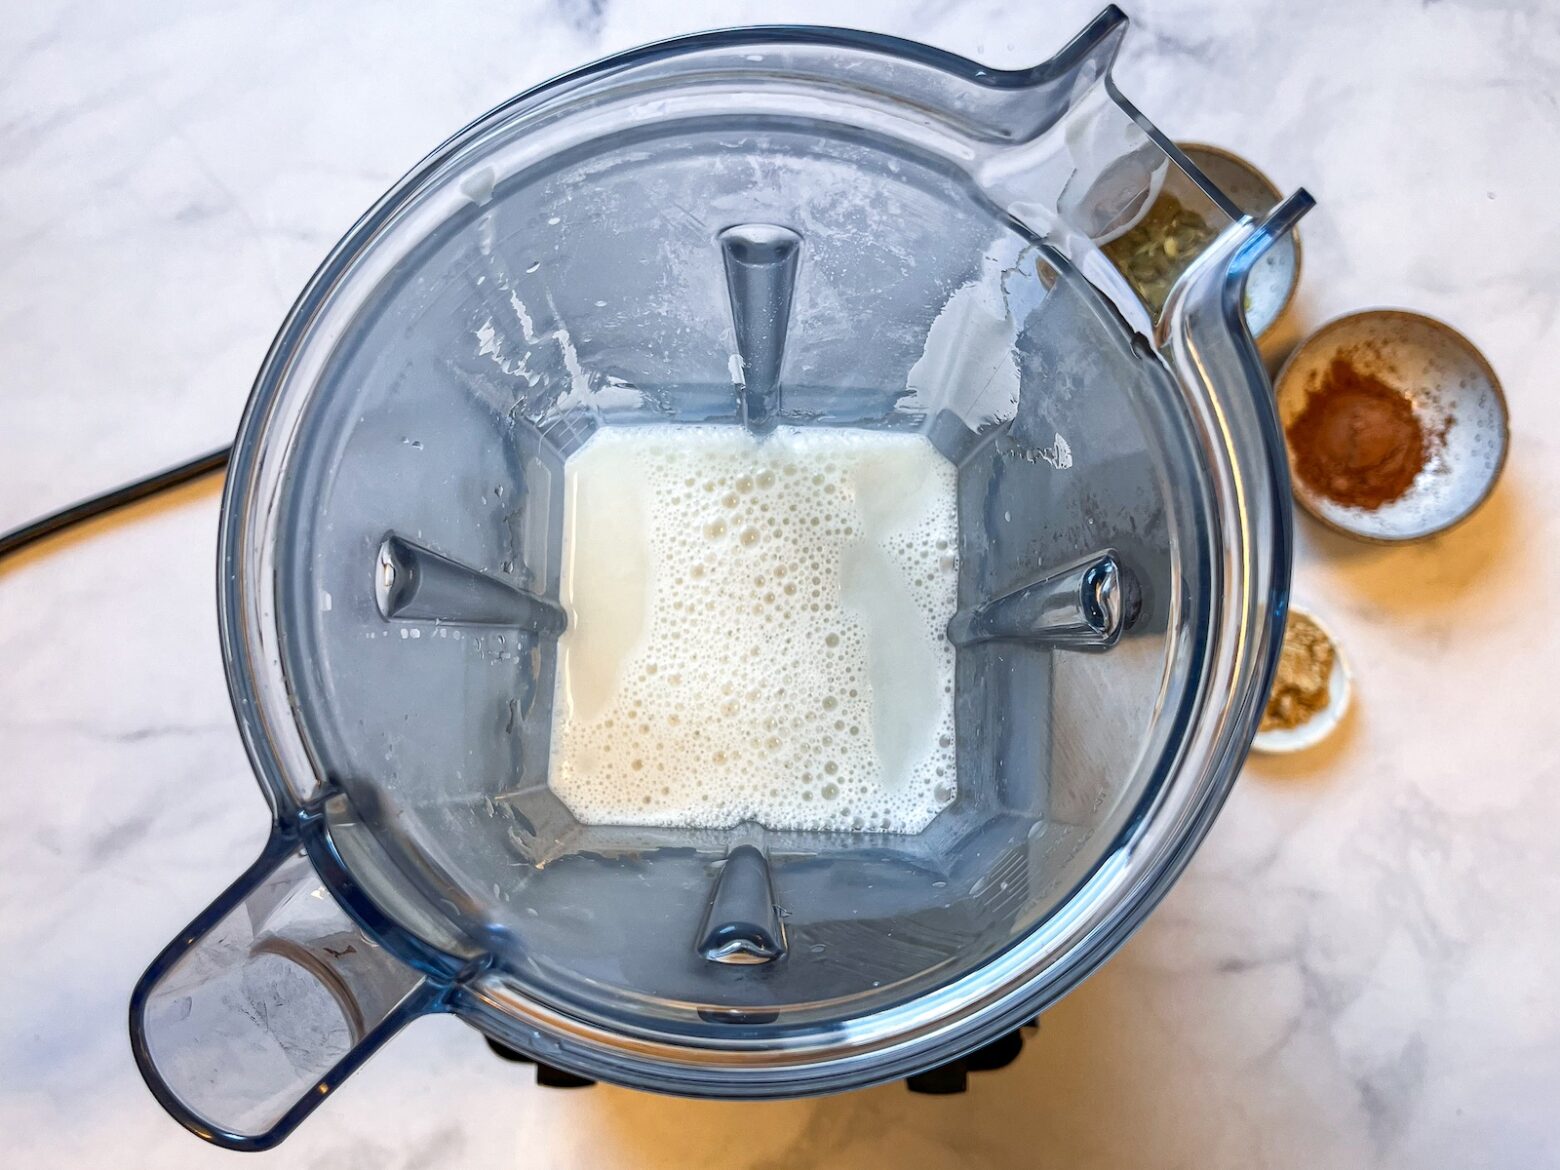 Almond milk being blended with other ingredients to make a latte.